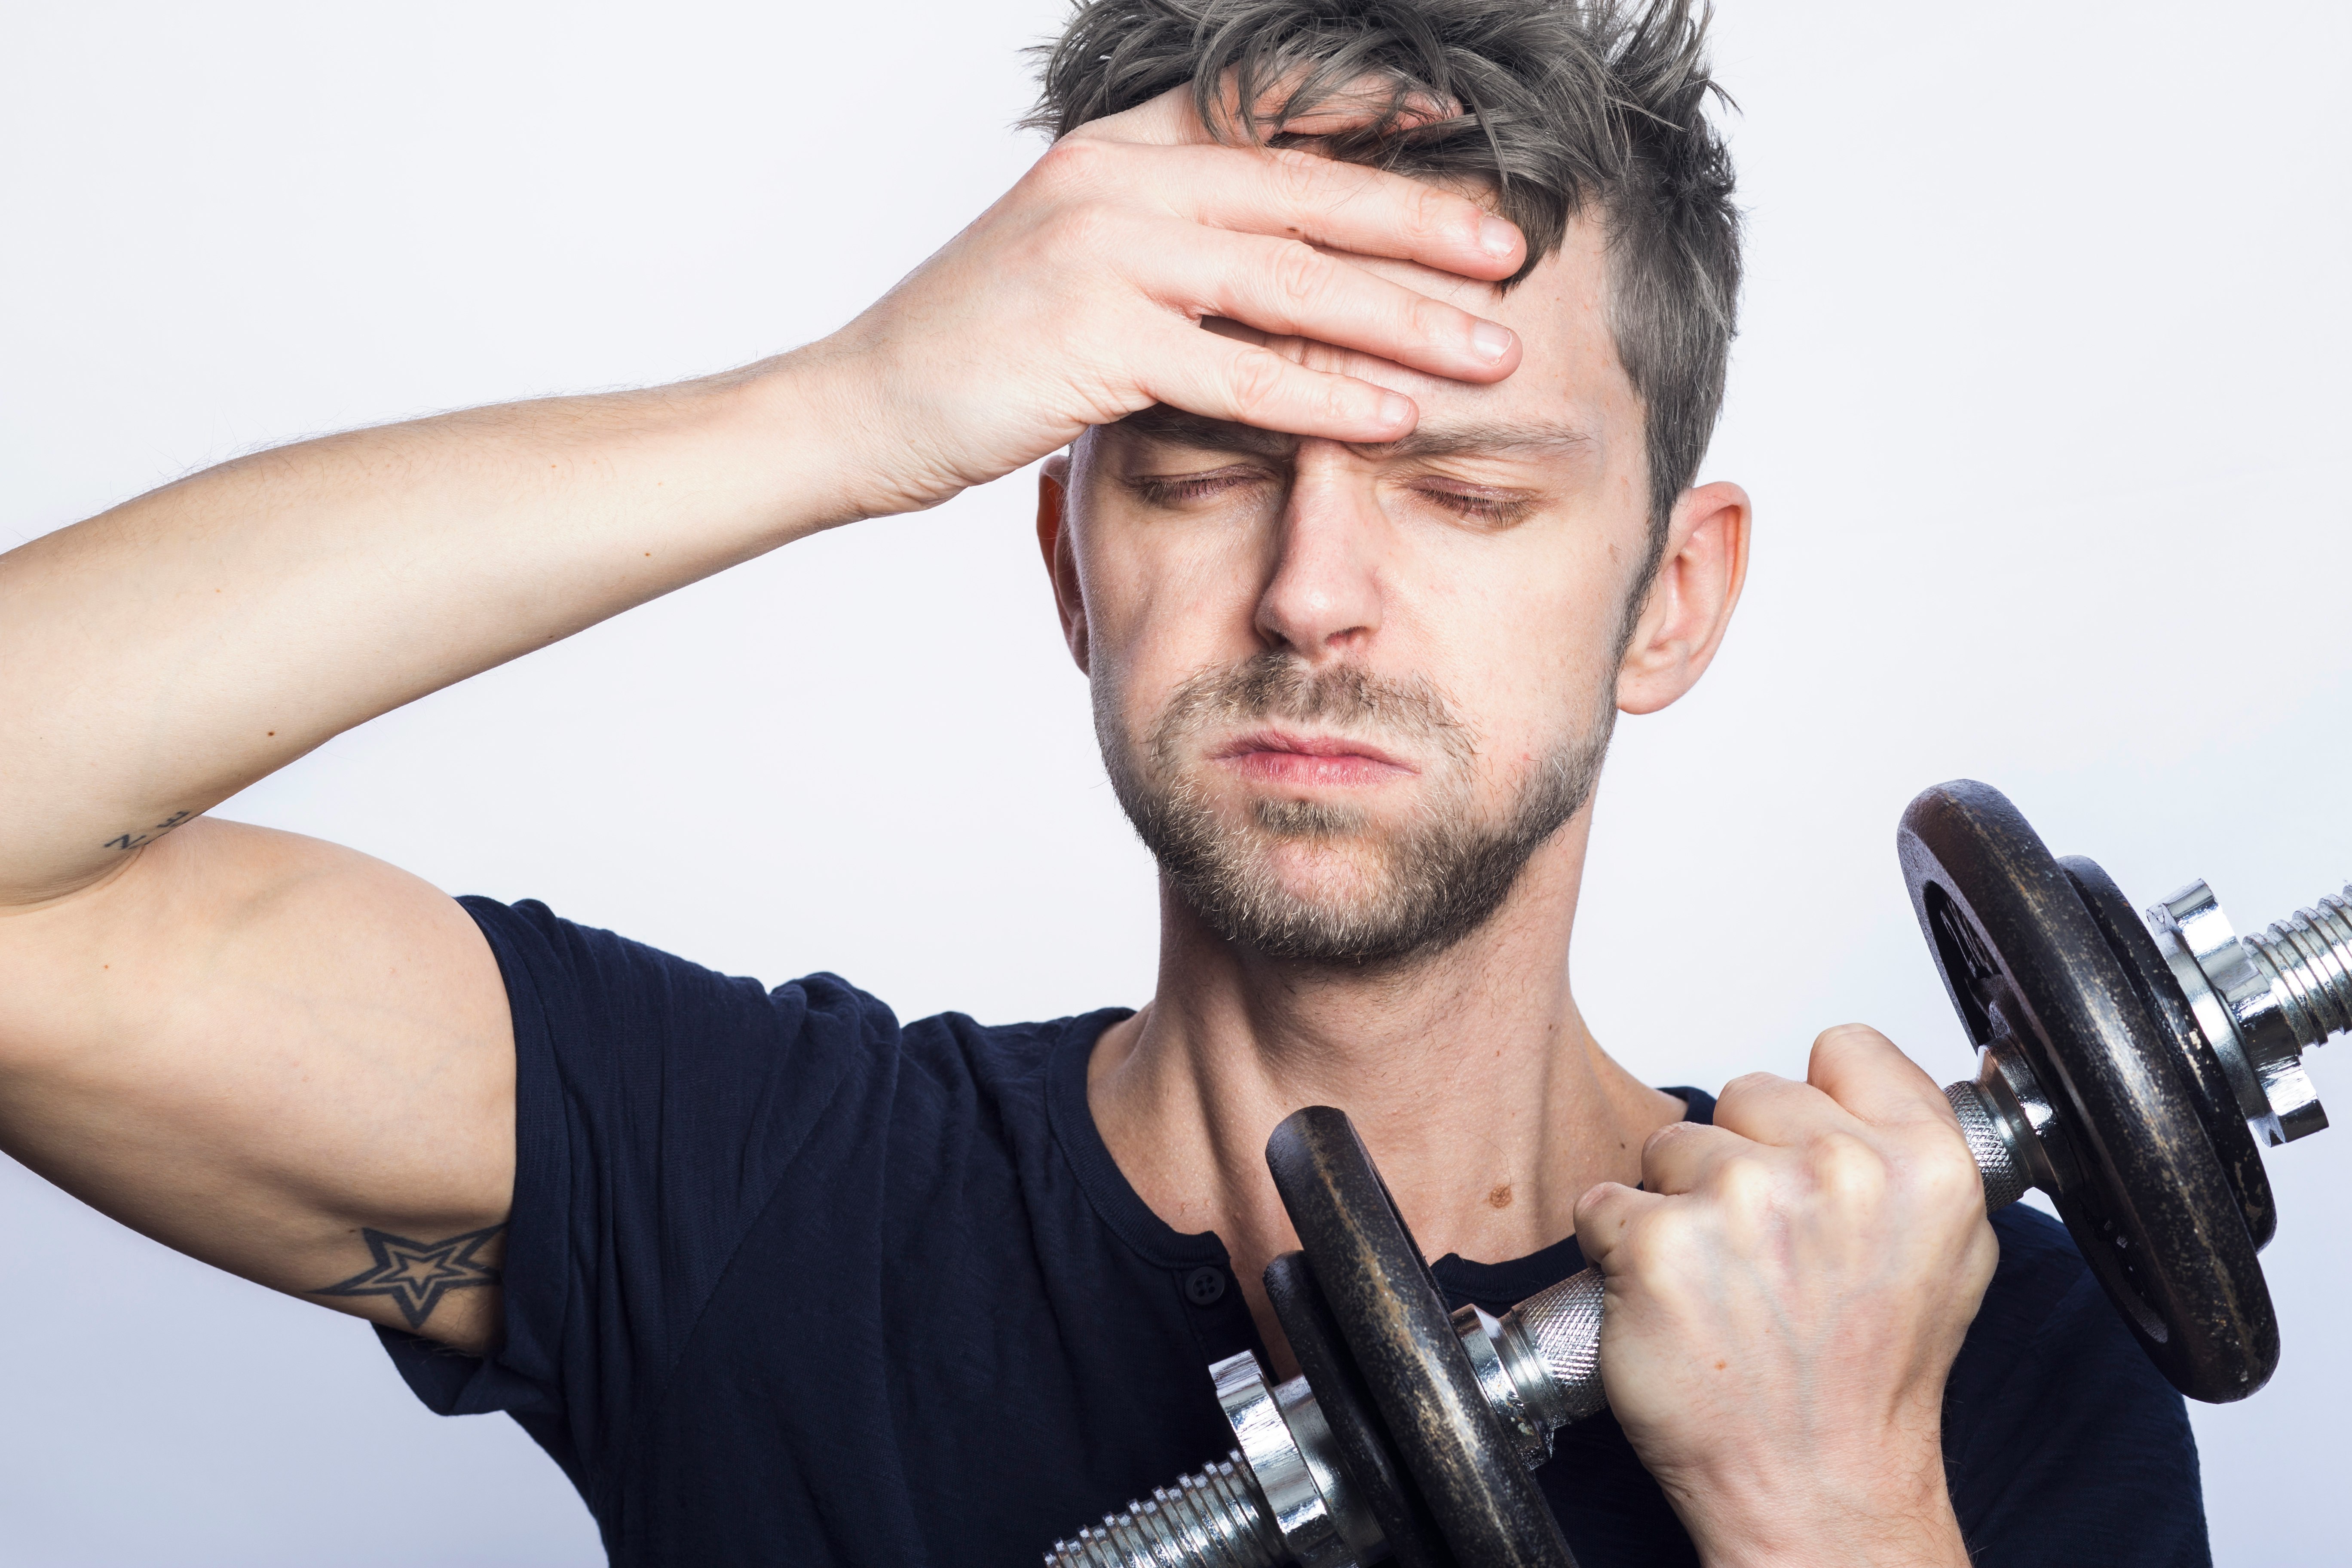 What are the symptoms of sports burnout?